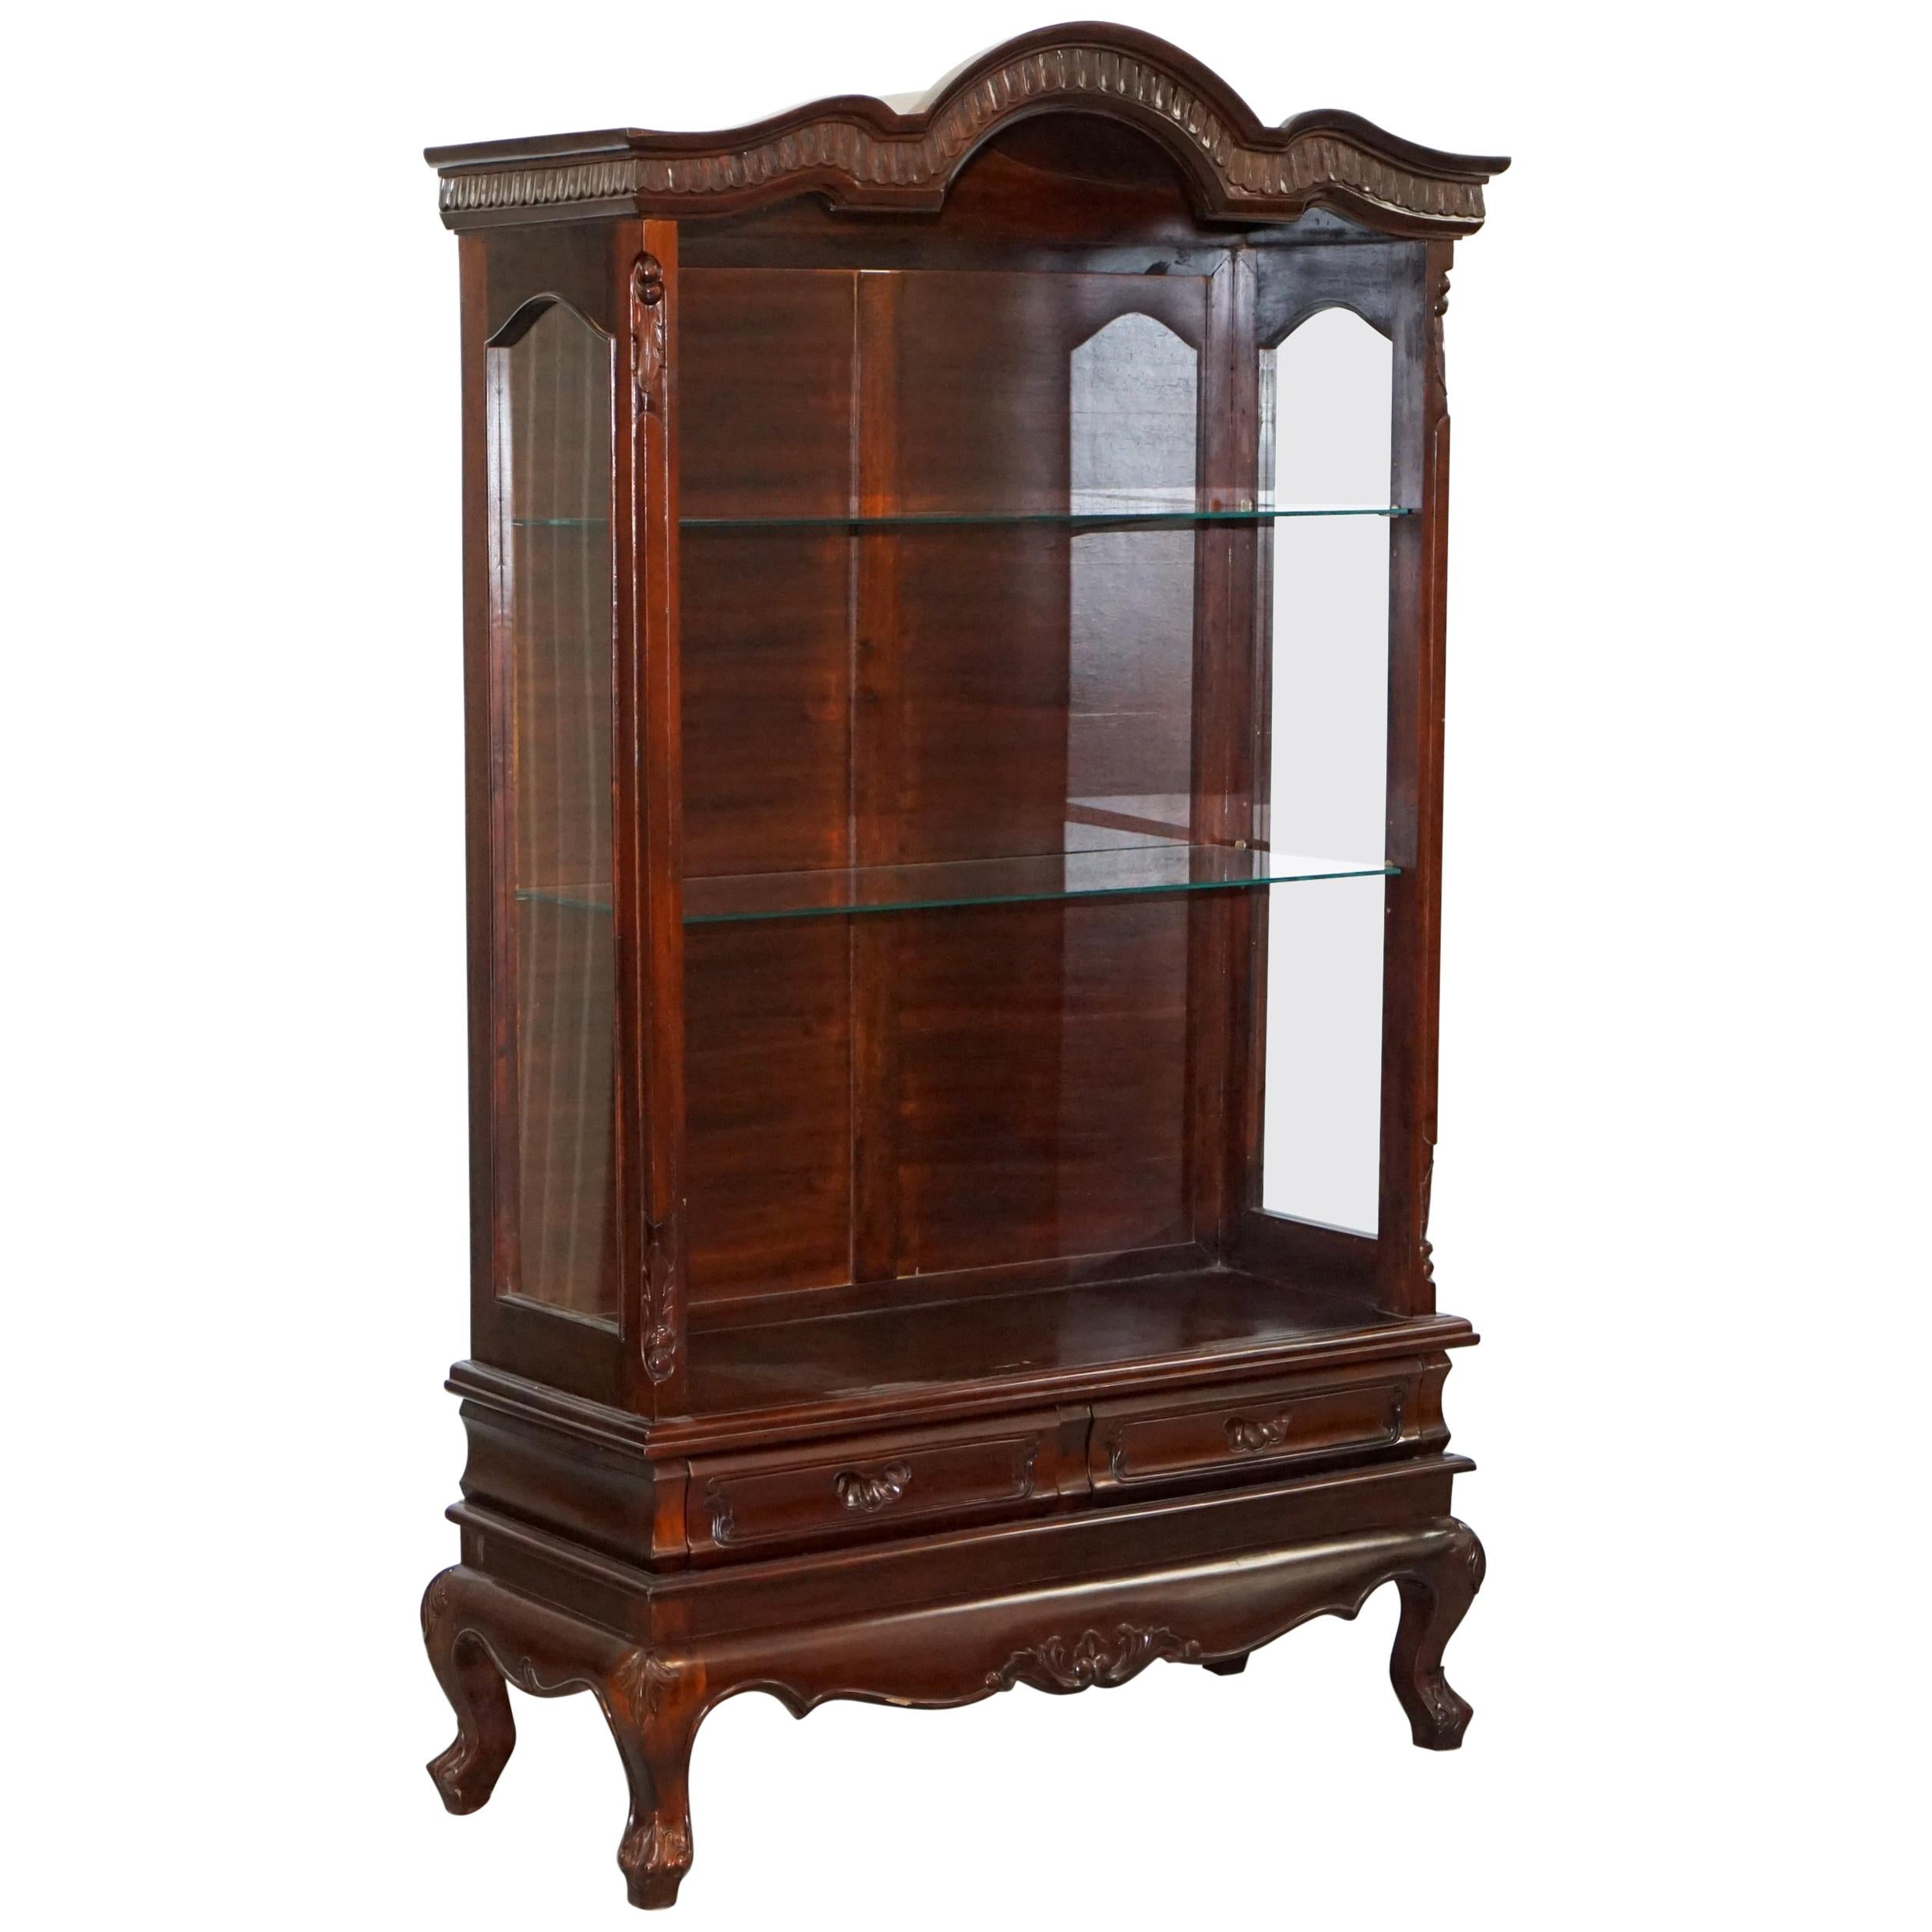 Solid Mahogany with New Glass Shelves Ornately Carved Wood Display Cabinet